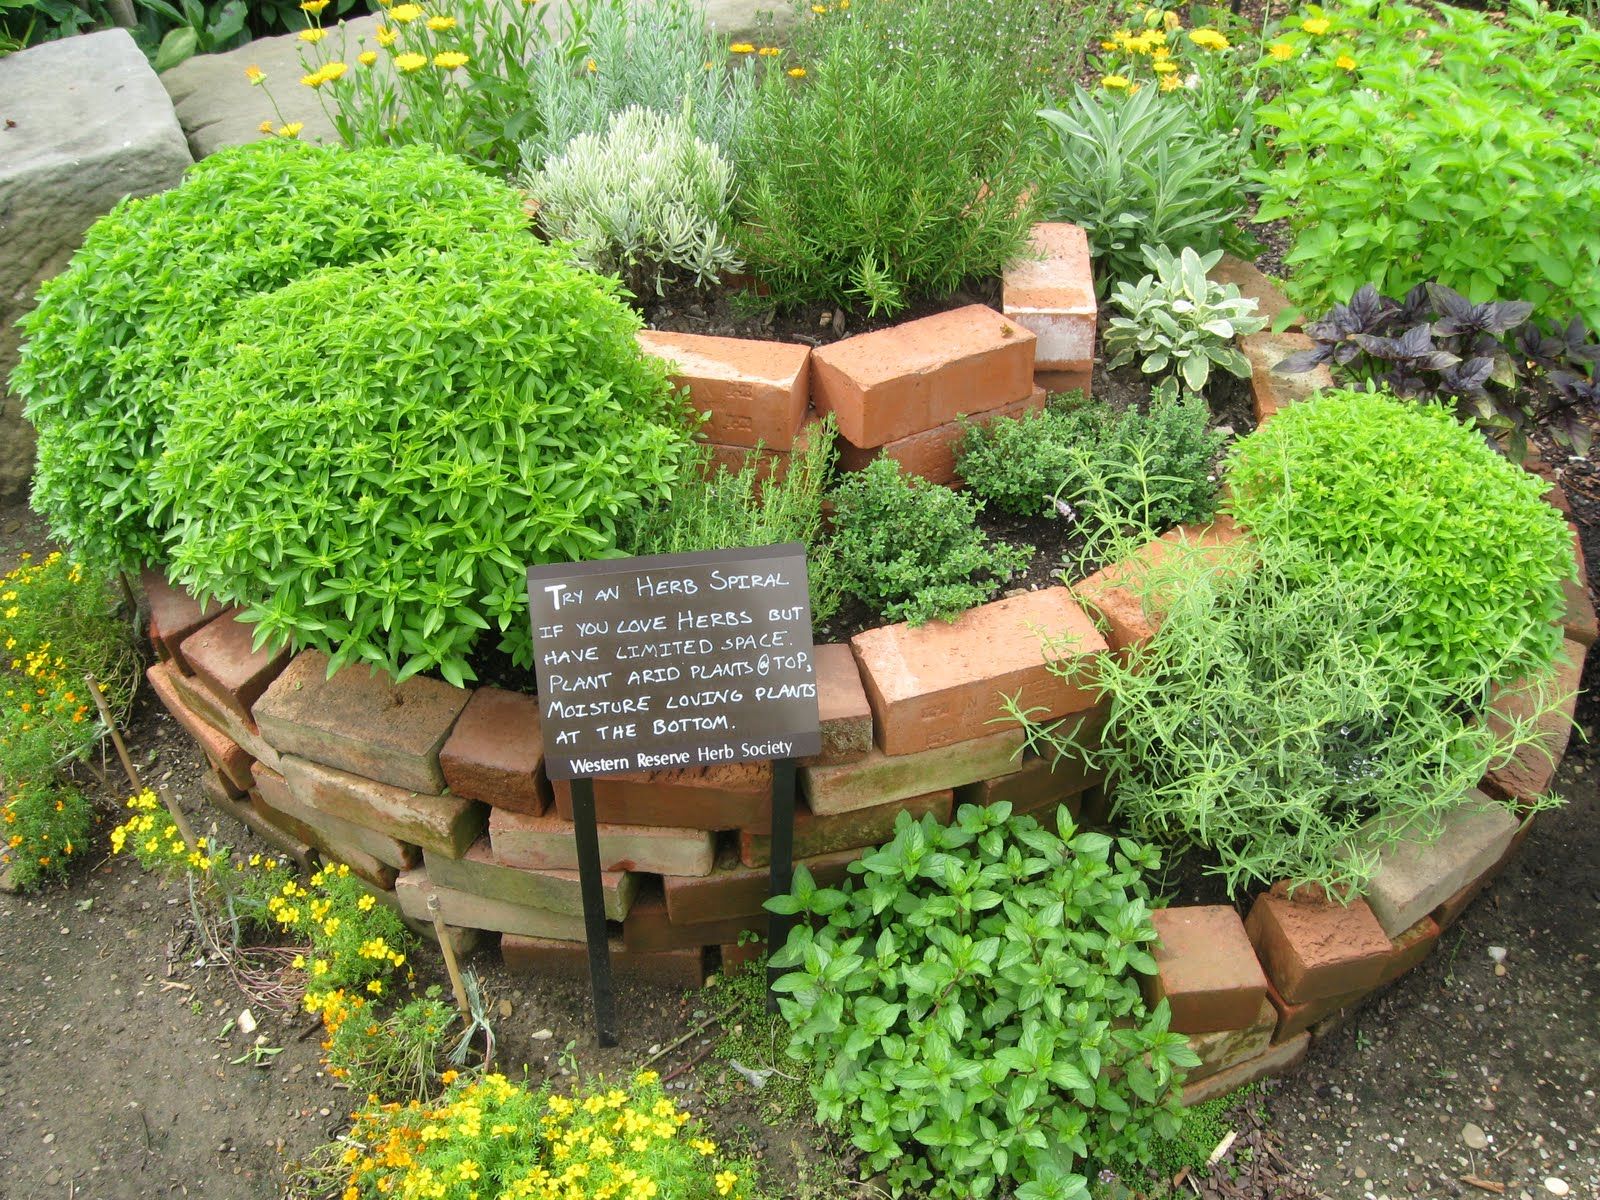 so... i'm rather consumed with wanting to build a spiral herb garden ...